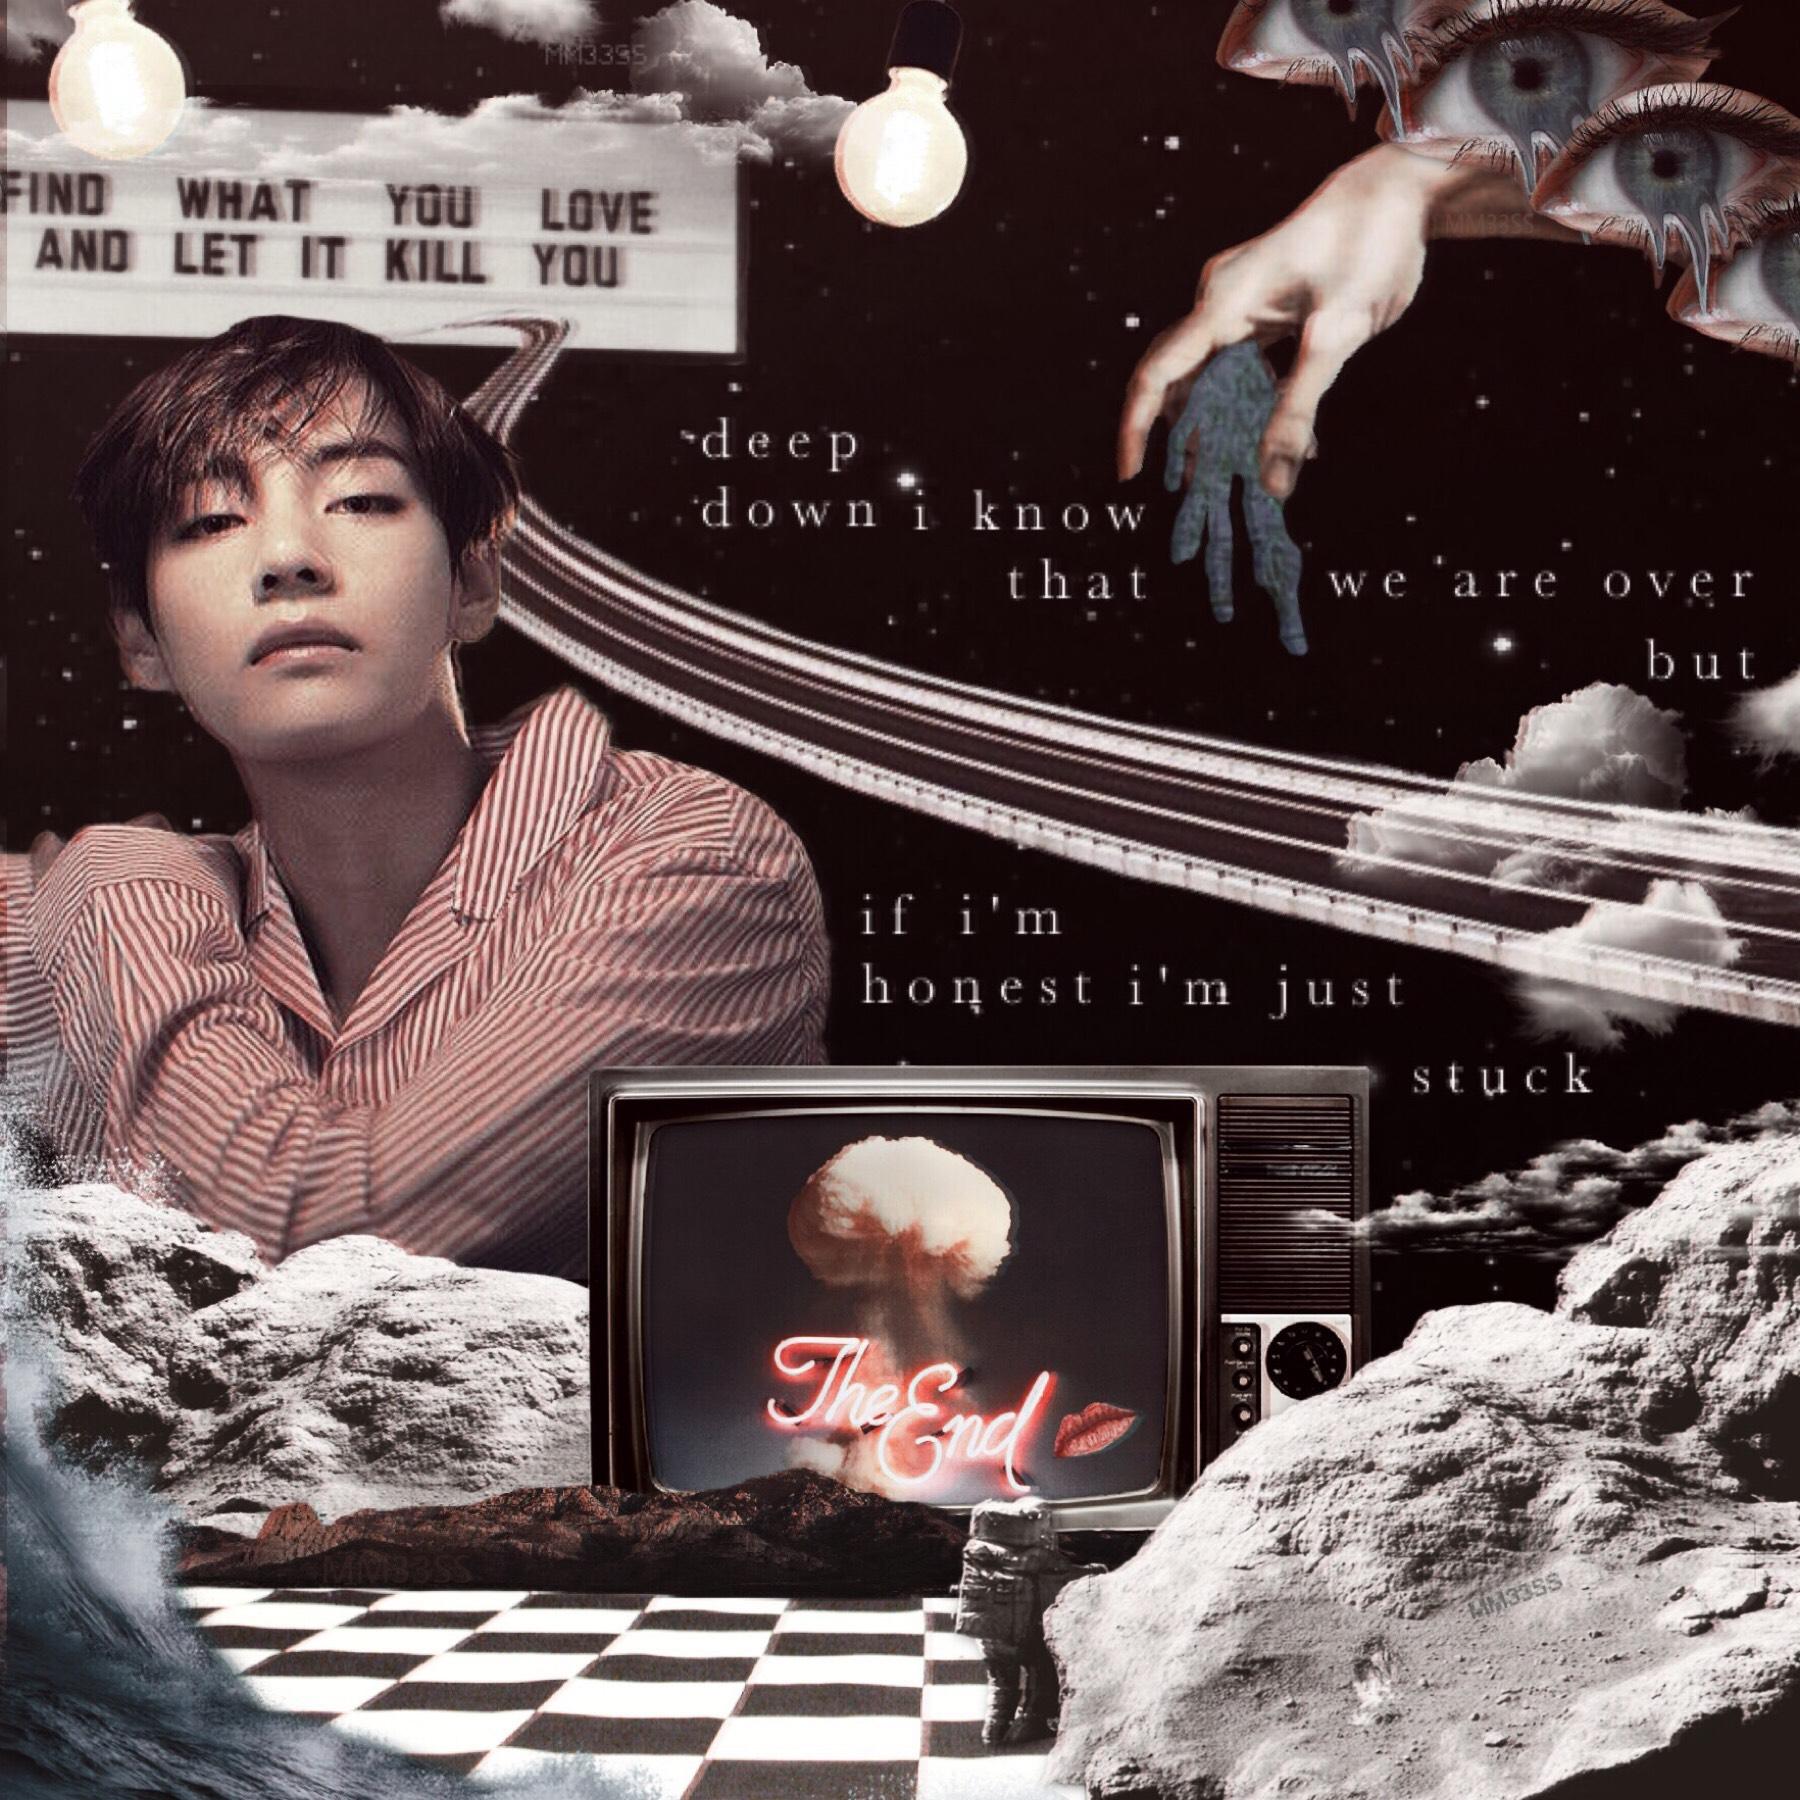 maybe / janieck x BUNT / Apr. 26, 2019

created for contest held by 1LLUS1ONS

i once thought i could post 1 edit a week. now i aim for at least 1 edit a month lol.

image: kim taehyung (V)